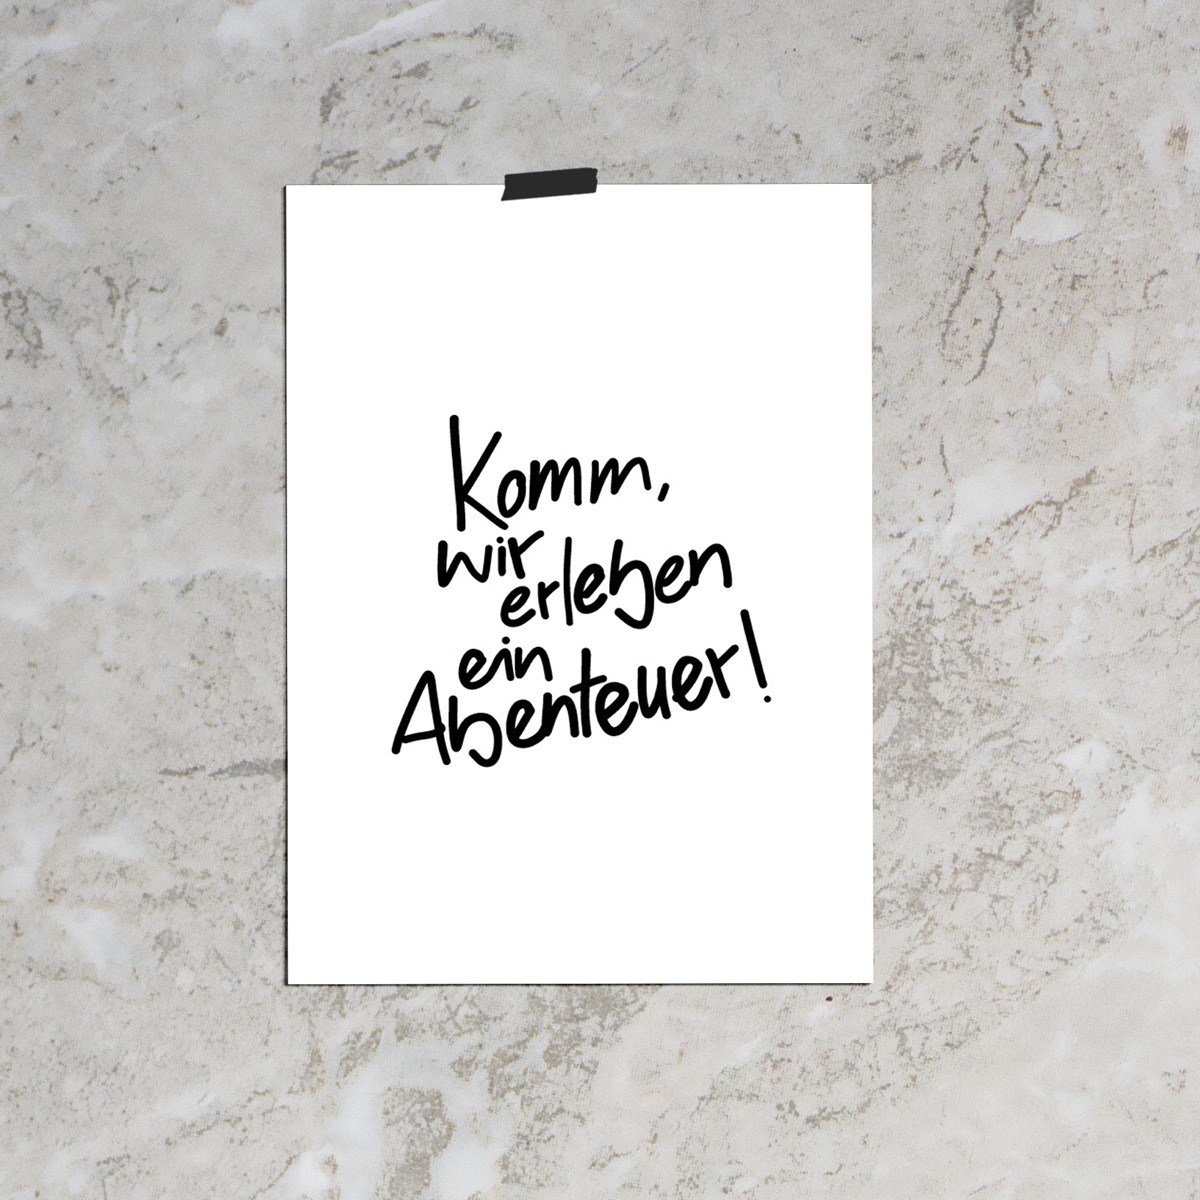 Love is the new black — Poster "Abenteuer", Din A4 Format